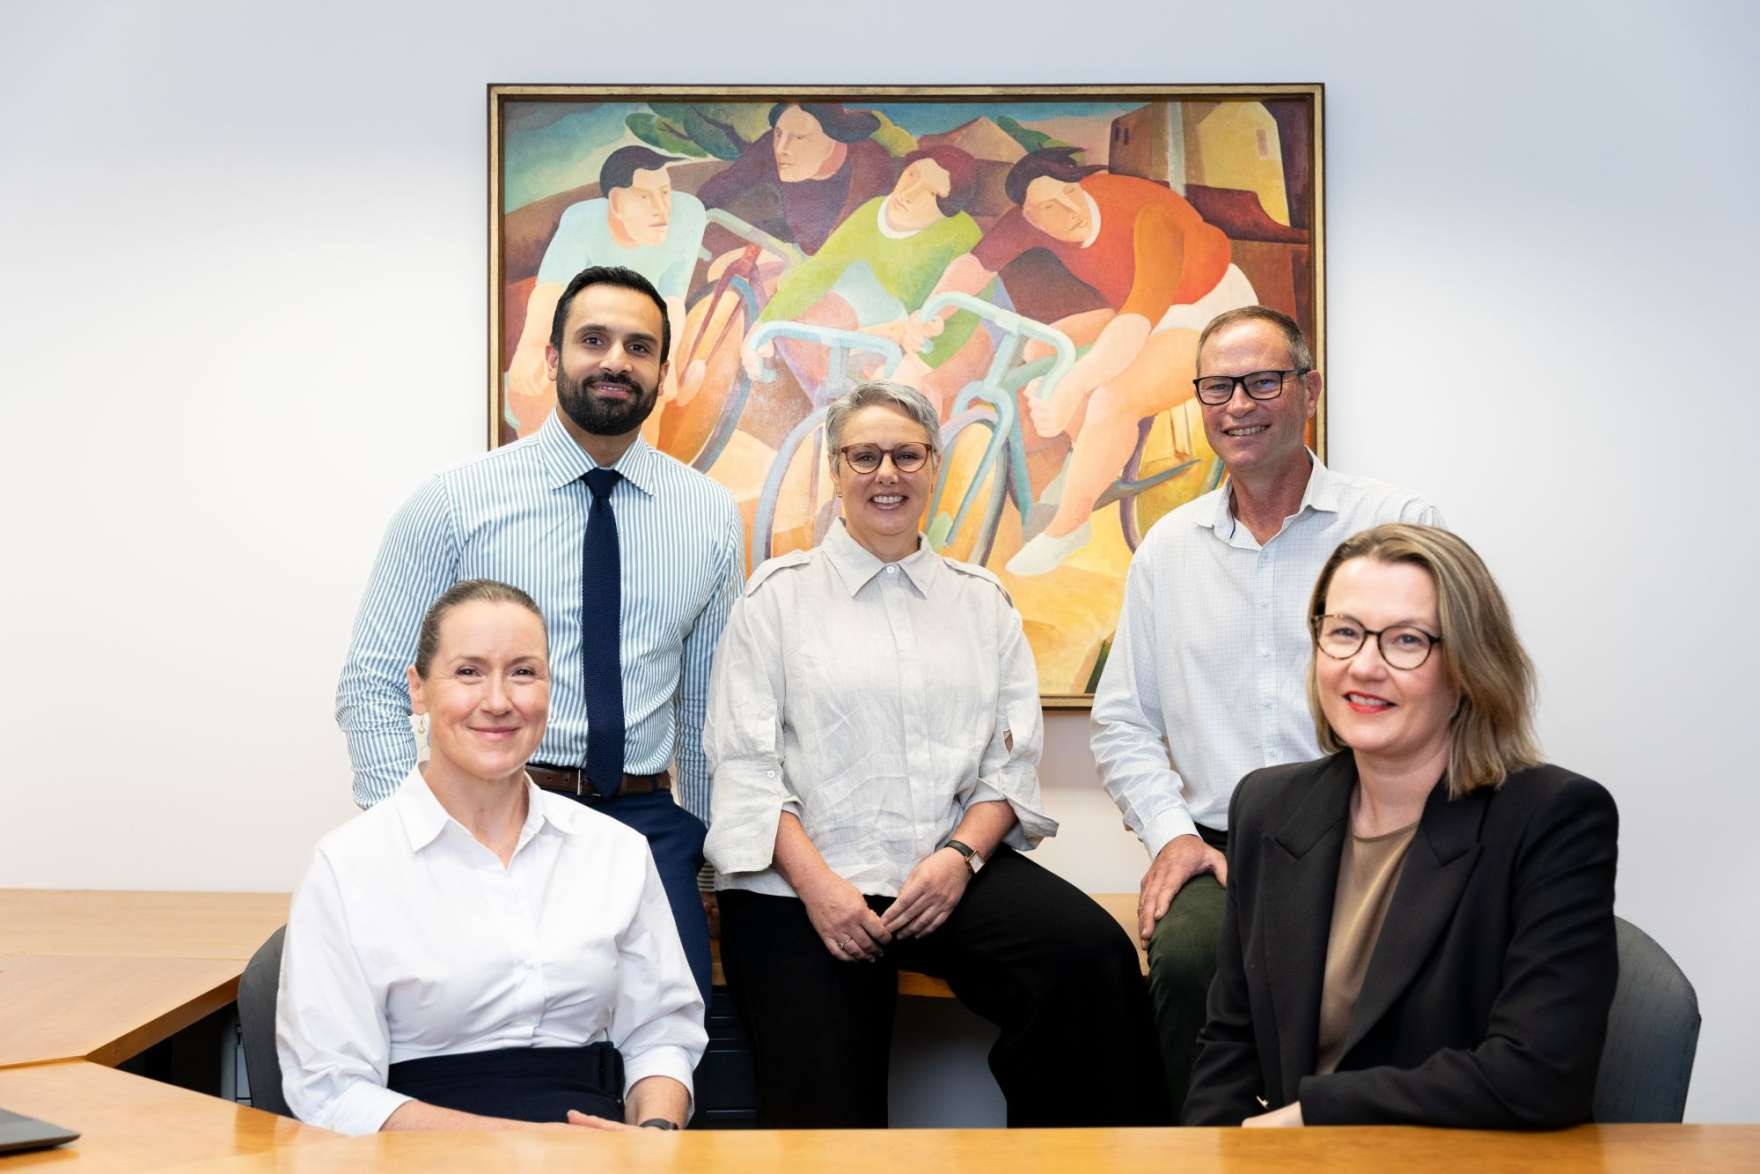 From left to right: Director Sustainable Development Geraldine Christou, Director Infrastructure Gary Randhawa, Chief Executive Officer Fiona Le Gassick, Director Corporate Services Chris Teitzel, and Director Community Louise Mitchell.
<br /><small>Artwork credit: Creagh Manning, <em>Sunday Cyclists</em>, 1976, oil on canvas. Shepparton Art Museum Collection, presented by the Visual Arts Board Contemporary Art Collection, 1984.
асс. по. 1984.0006</small>